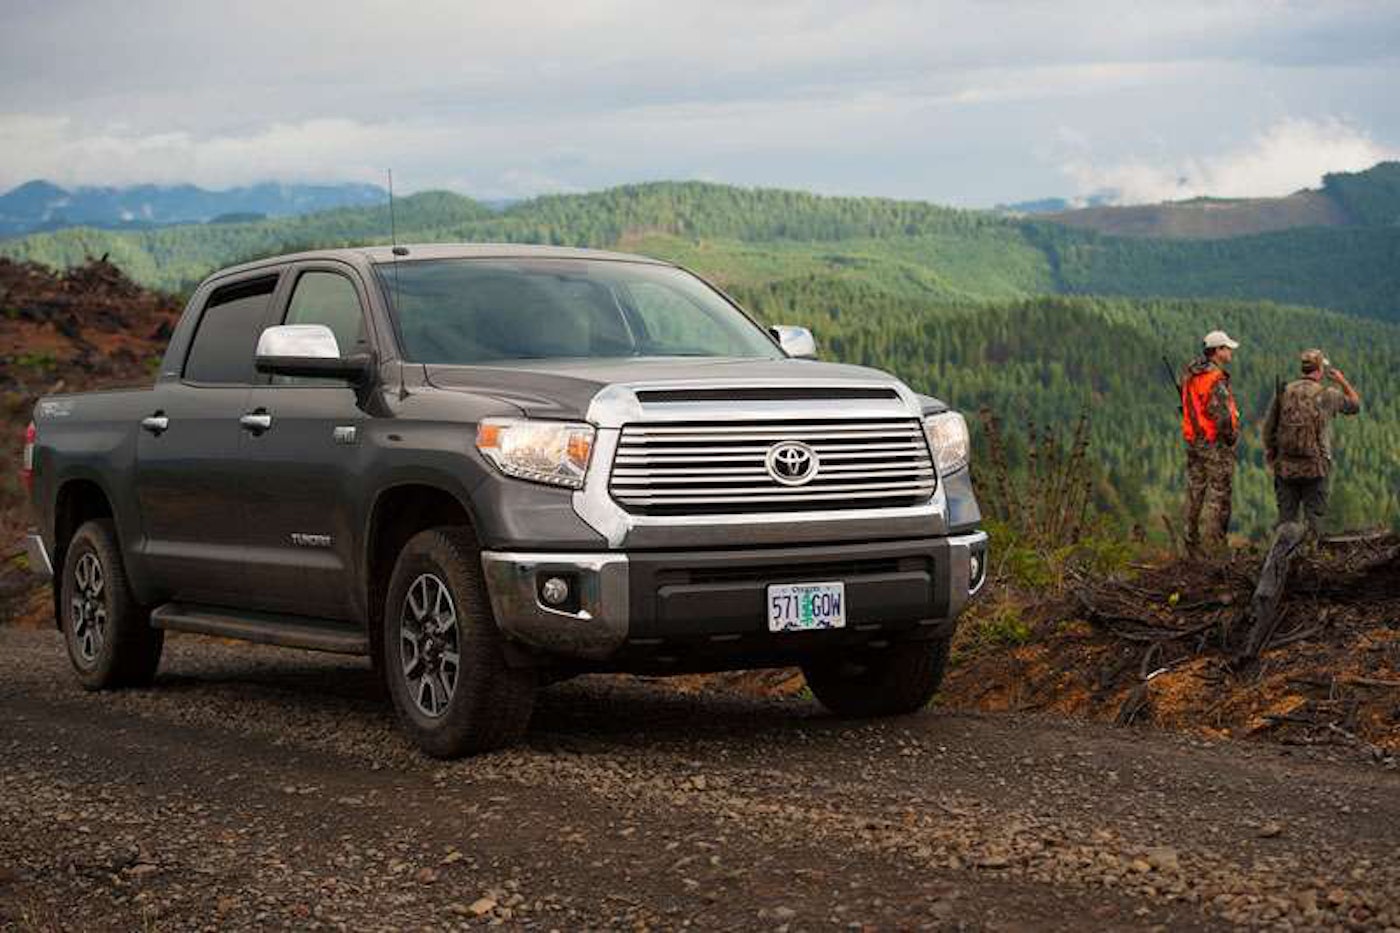 REVIEW: 2015 Toyota Tundra CrewMax 4×4 jumps off the line with abundant